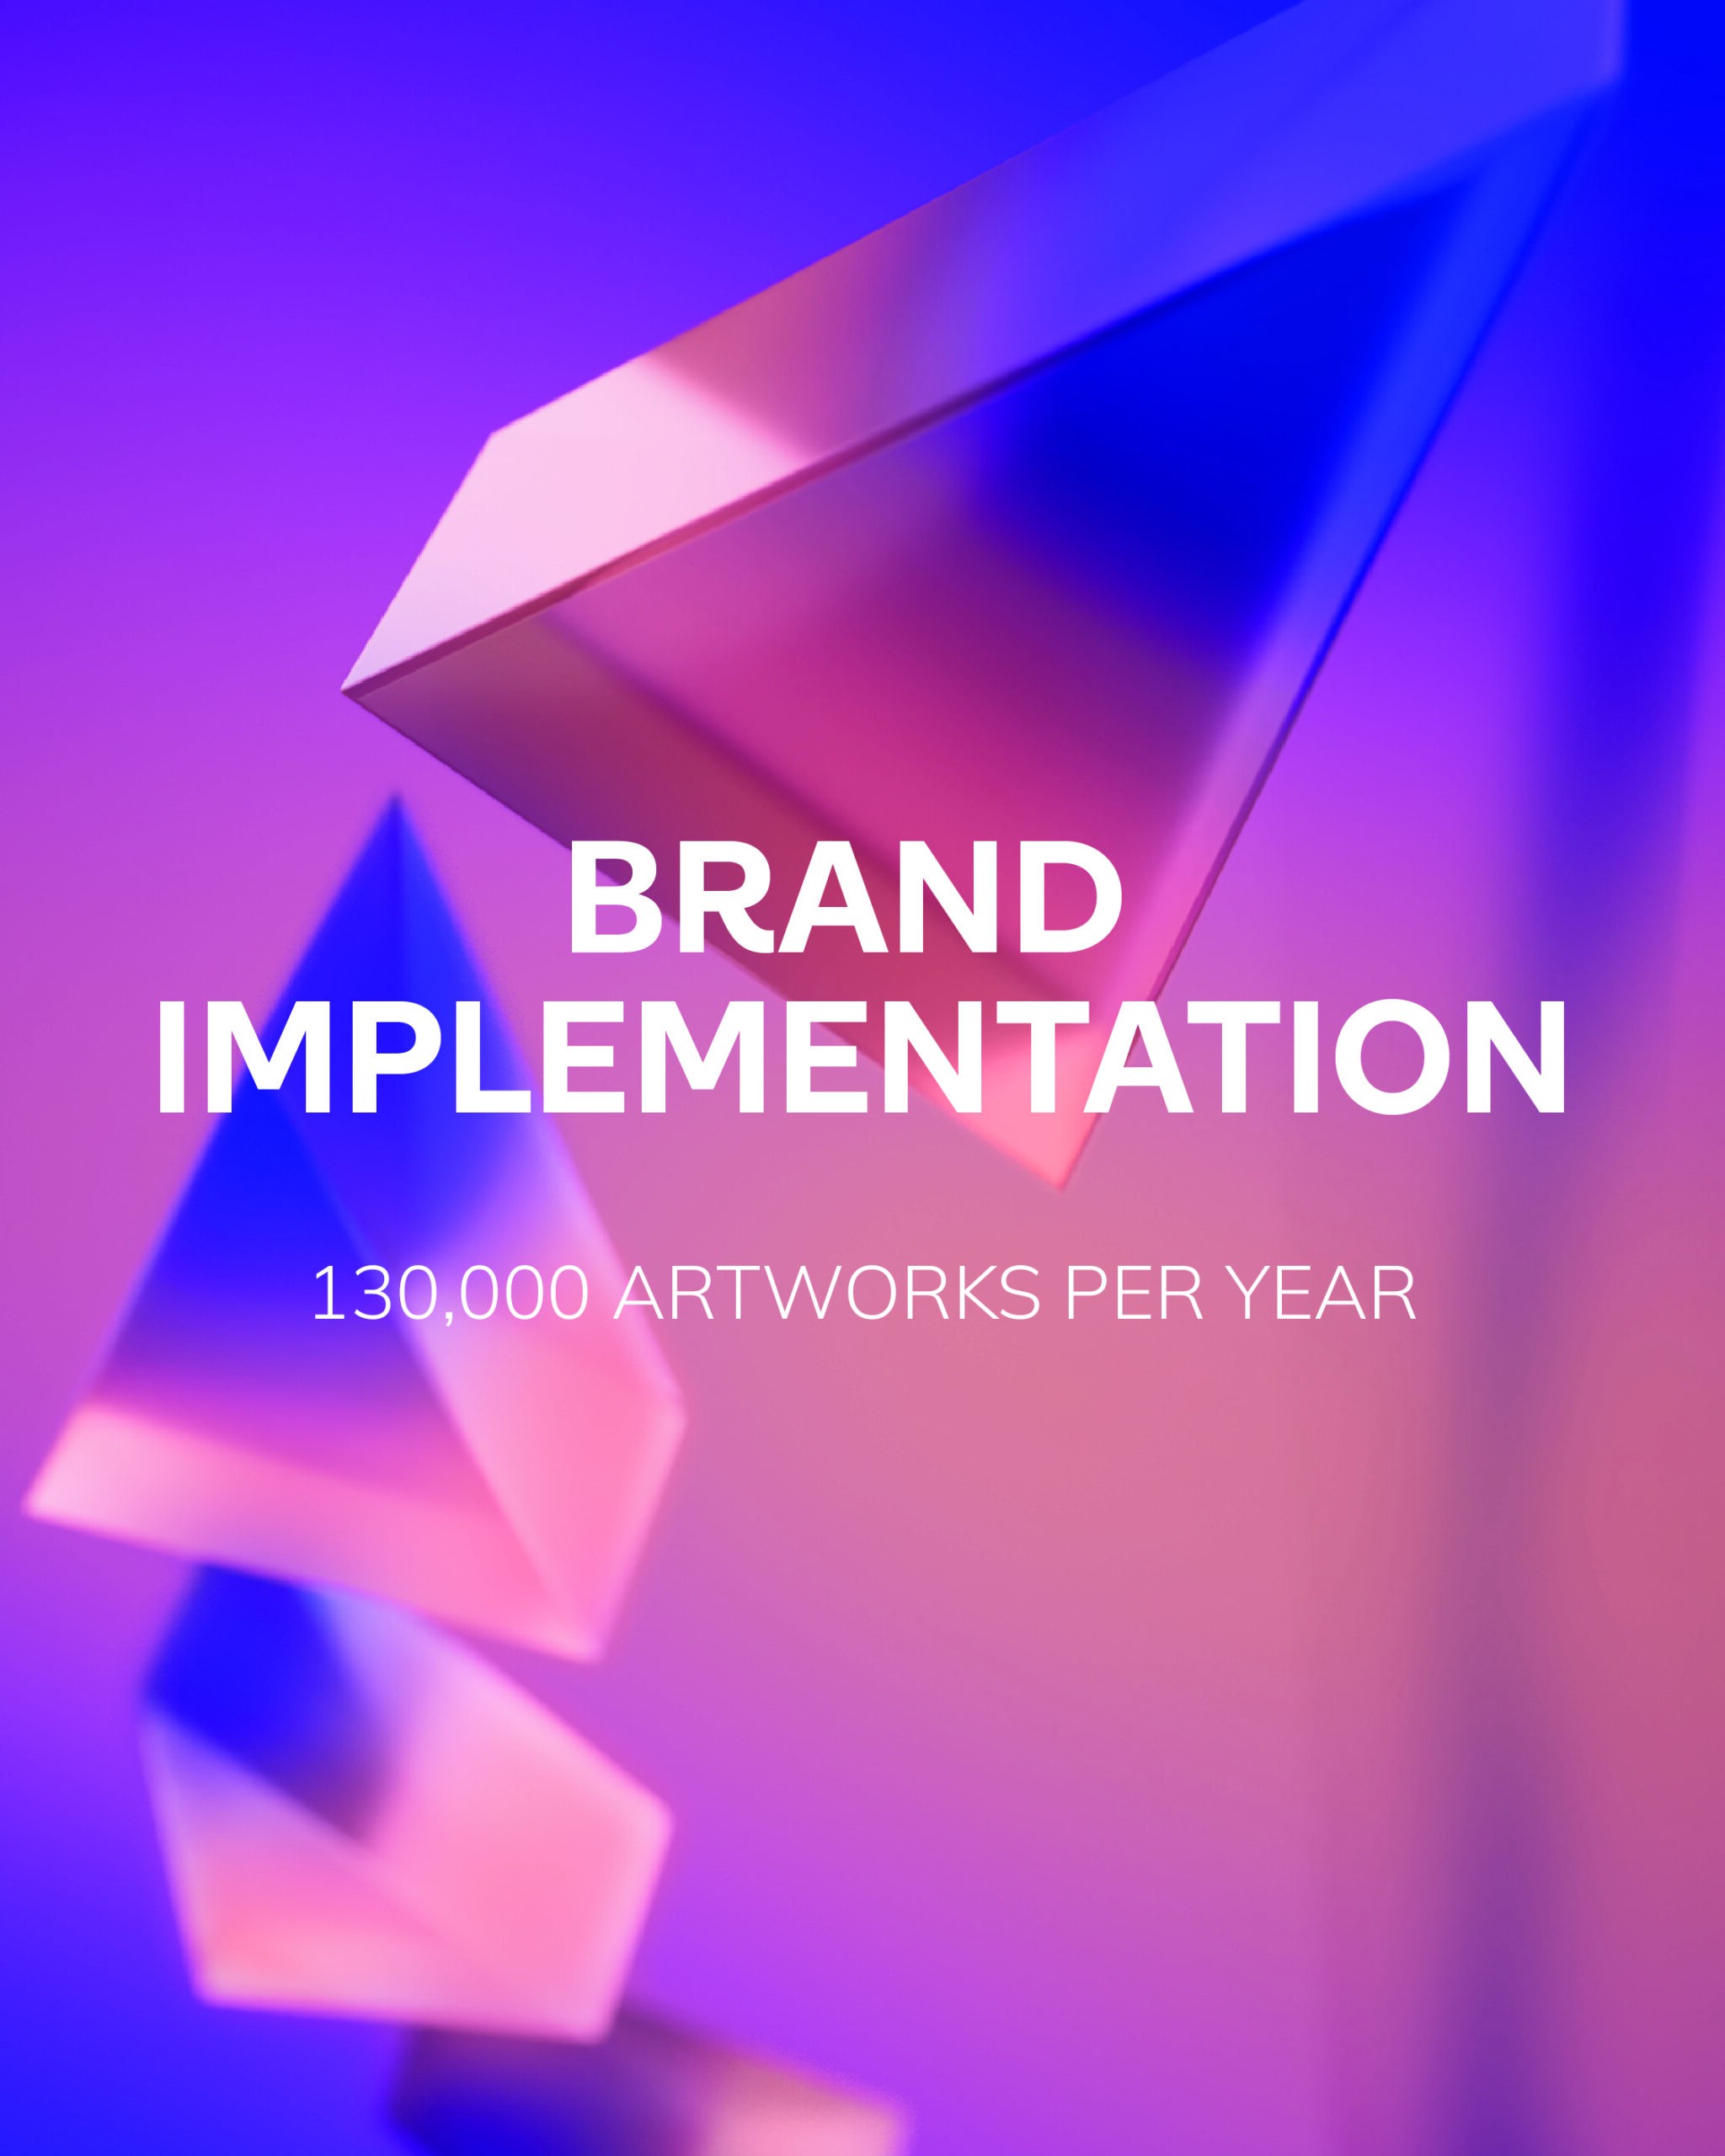 BRAND IMPLEMENTATION text by BRANDED agency